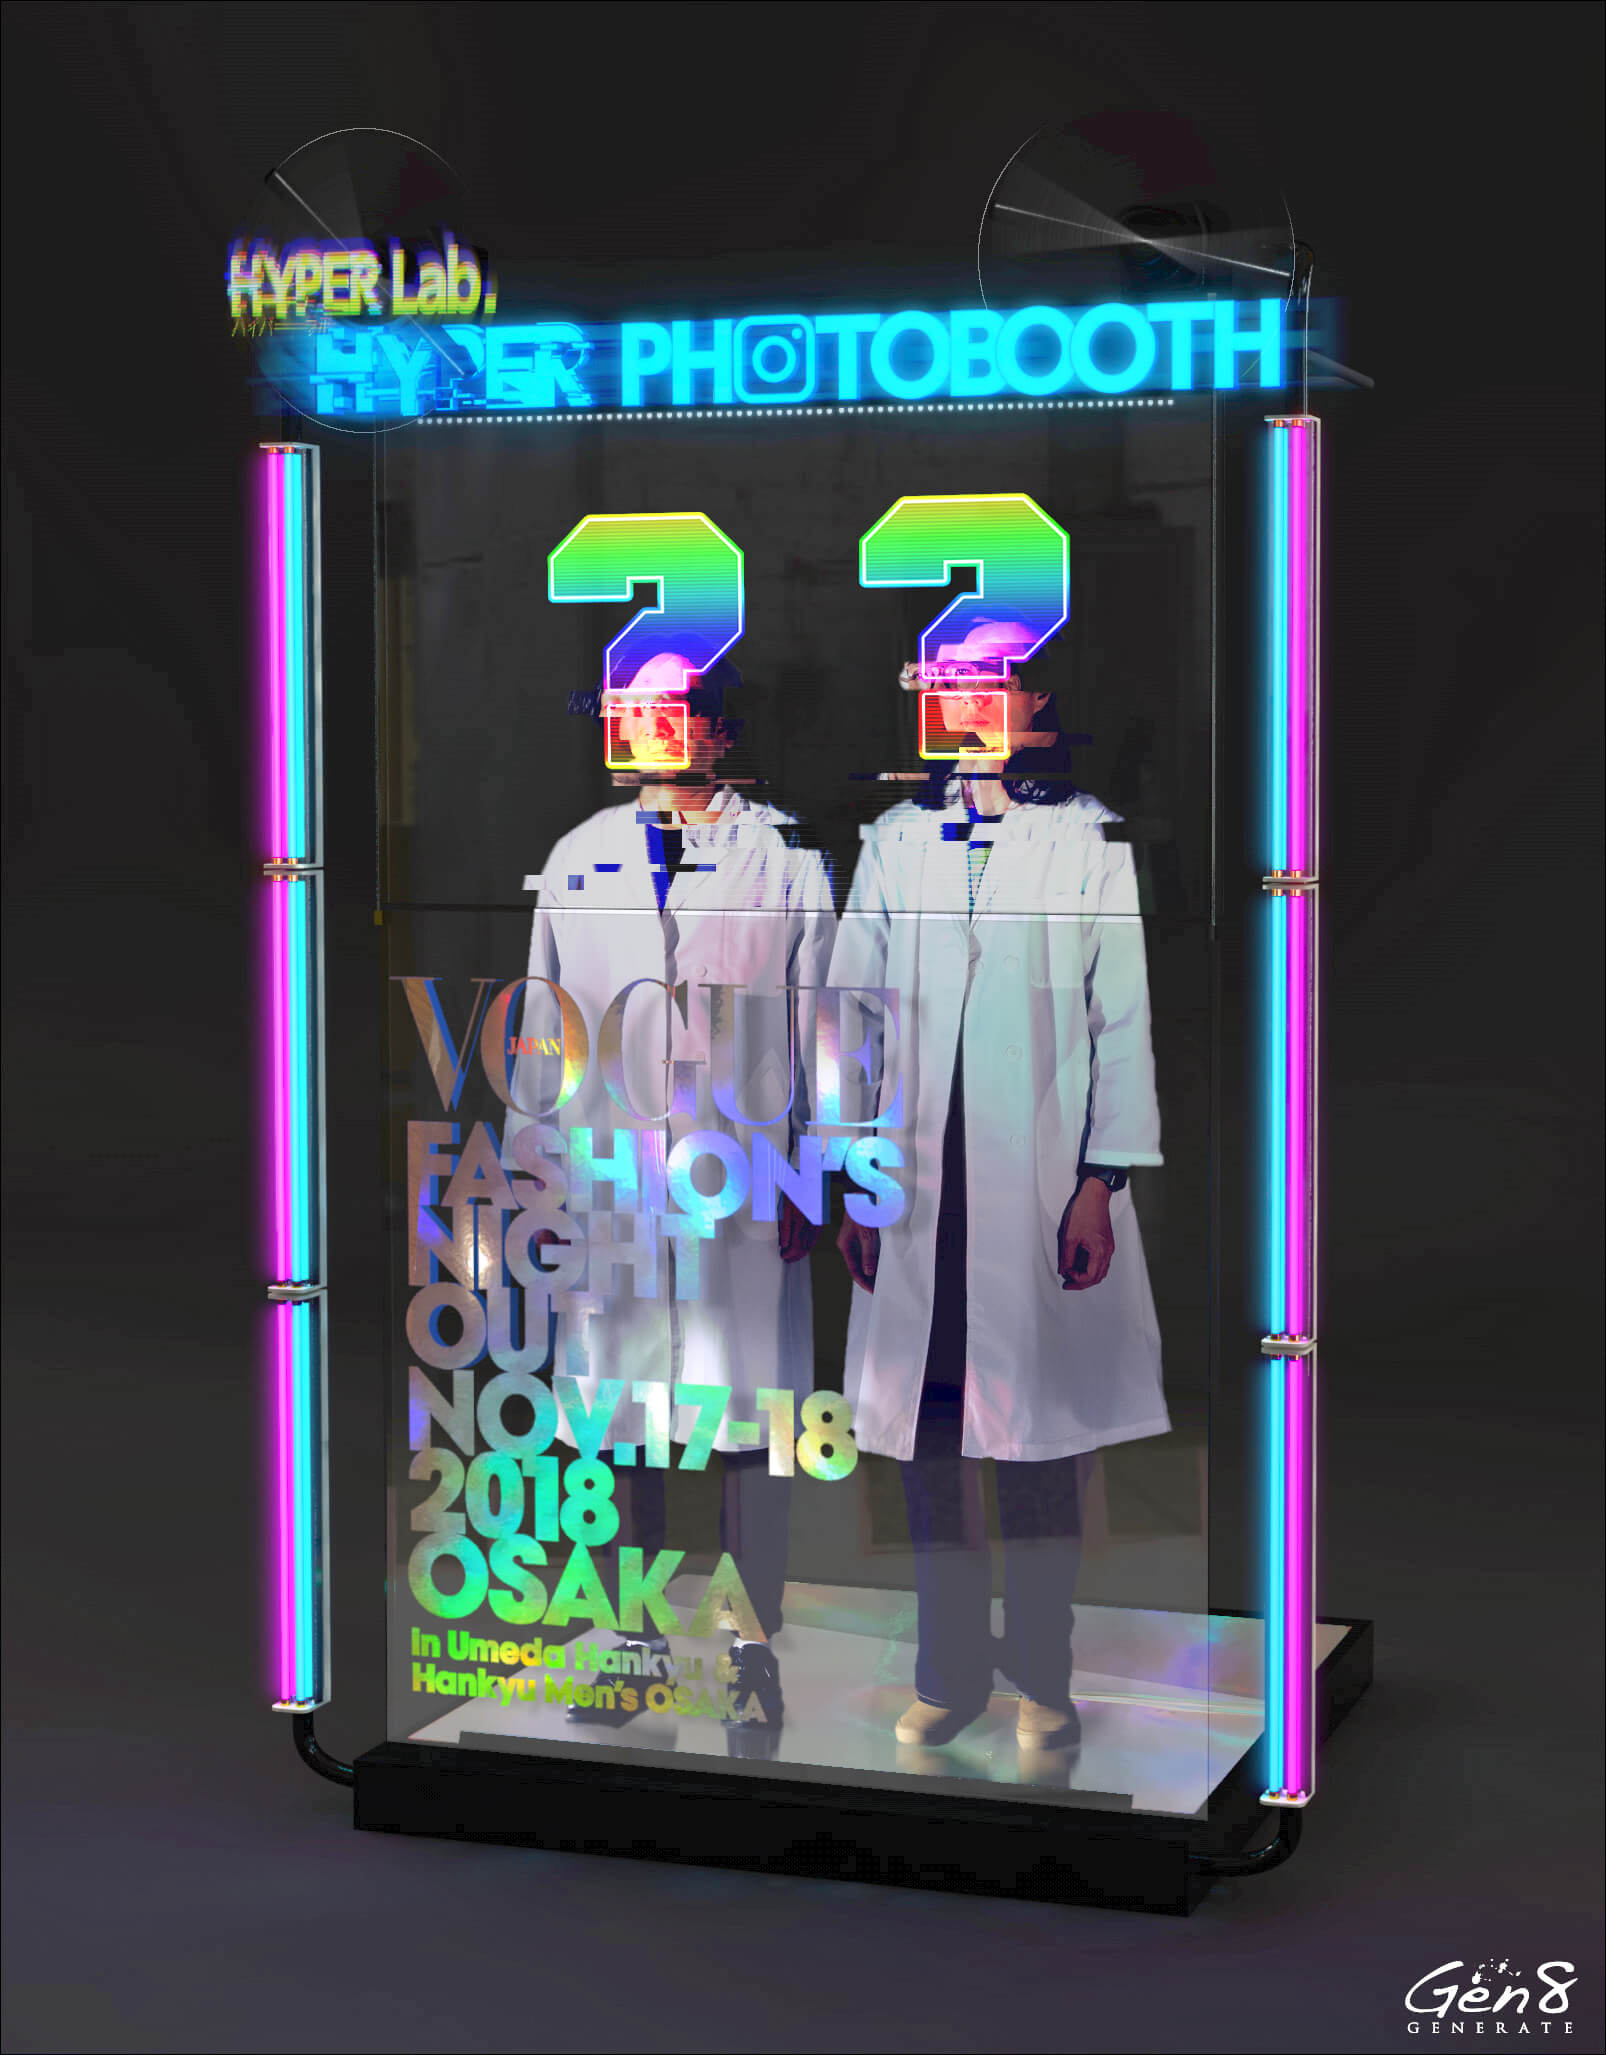 HYPER PHOTO BOOTH in “VOGUE FASHION’S NIGHT OUT”